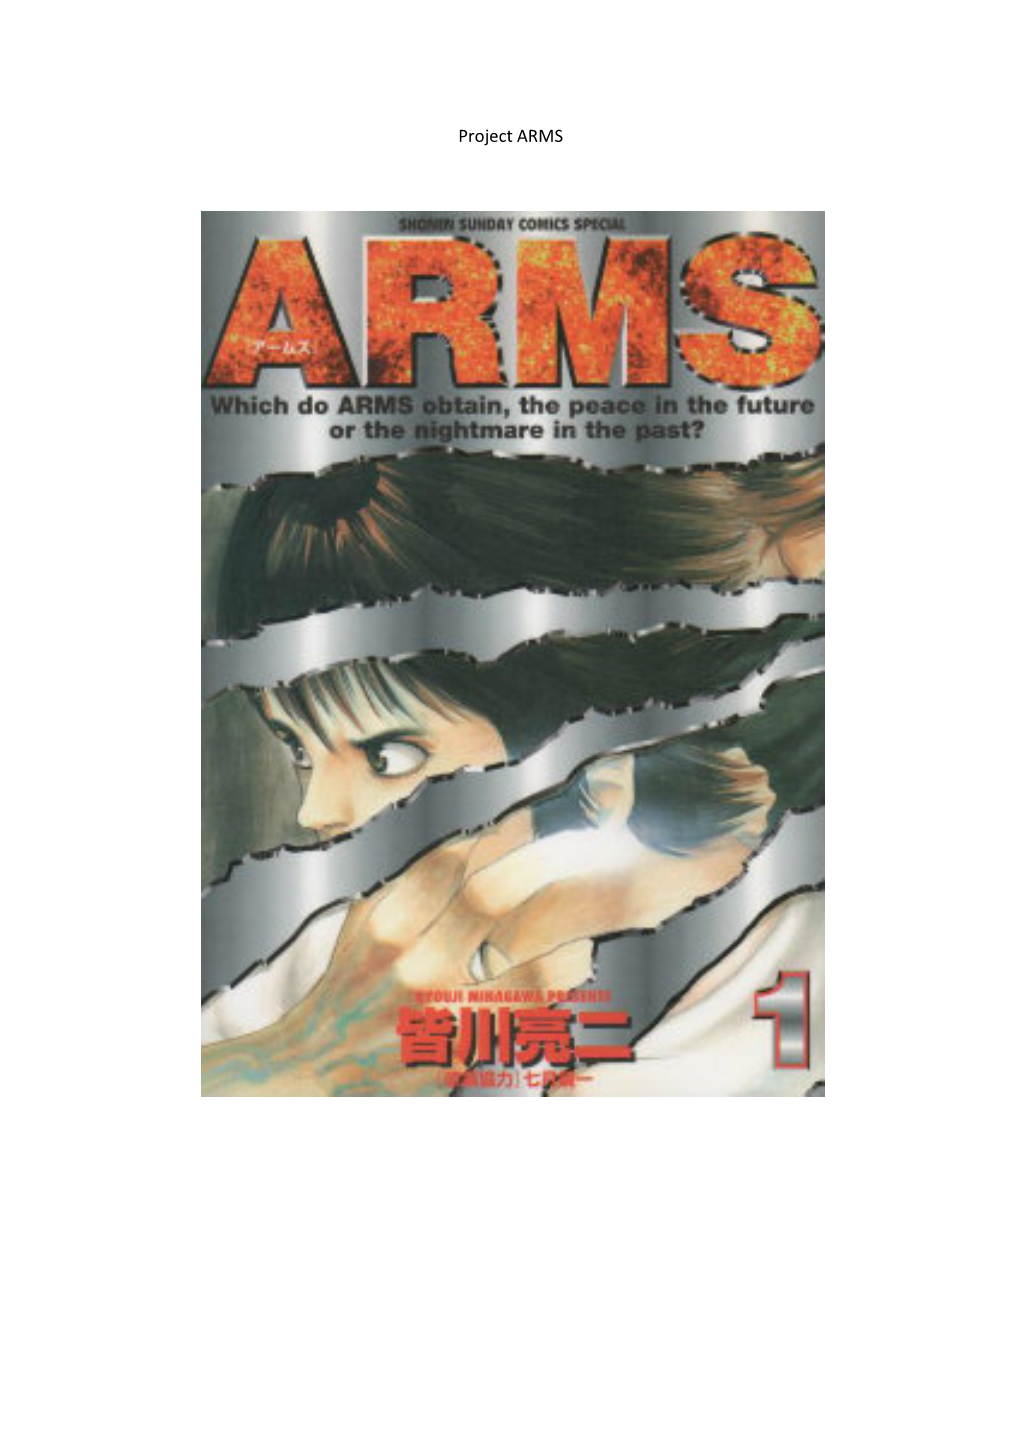 Project ARMS